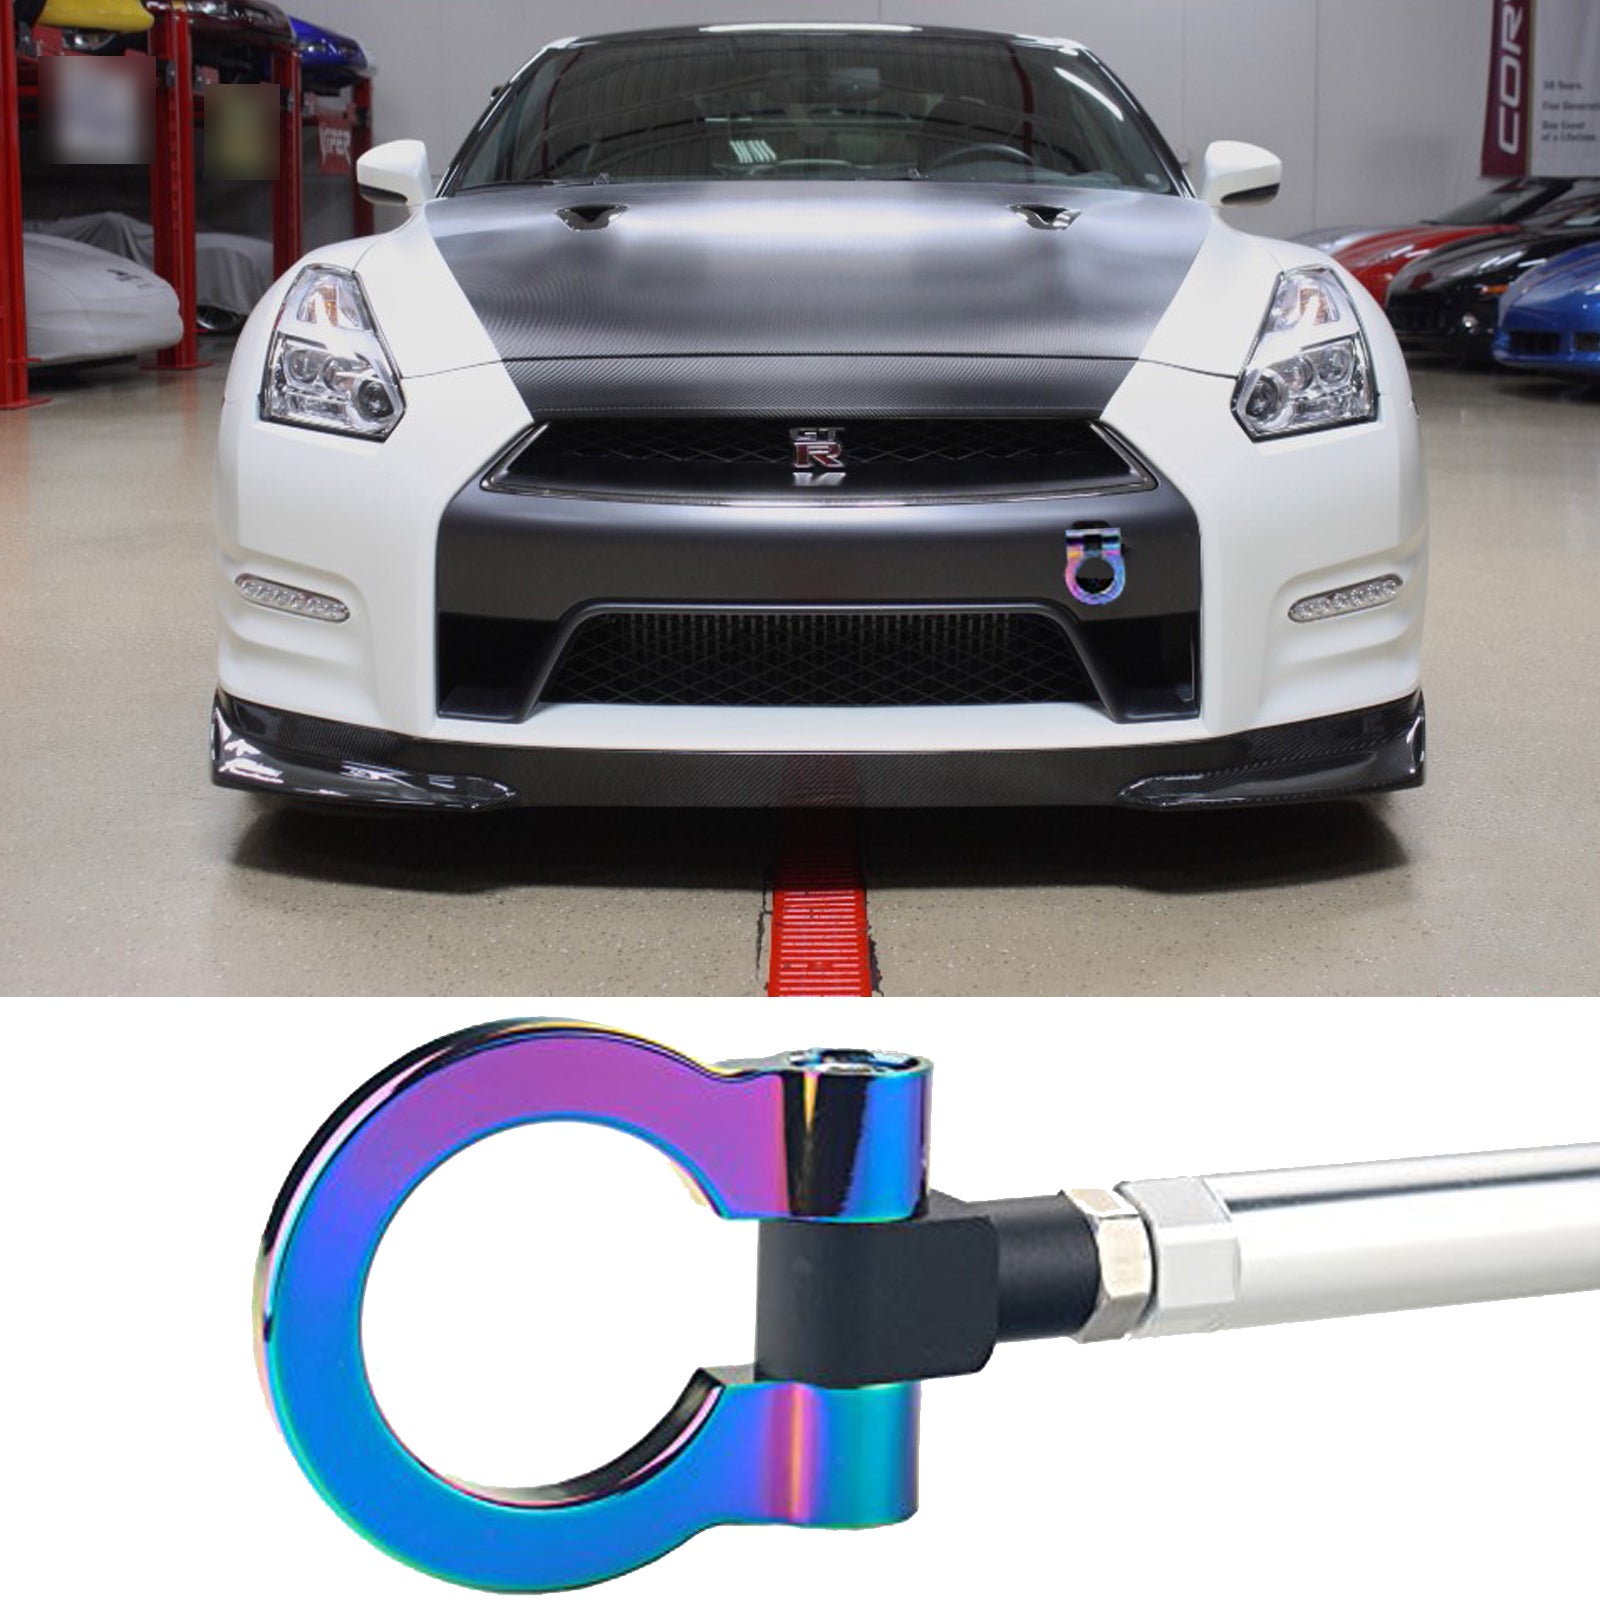 NEO Chrome JDM Style Front Bumper Tow Hook For Nissan 370Z 350Z Infini